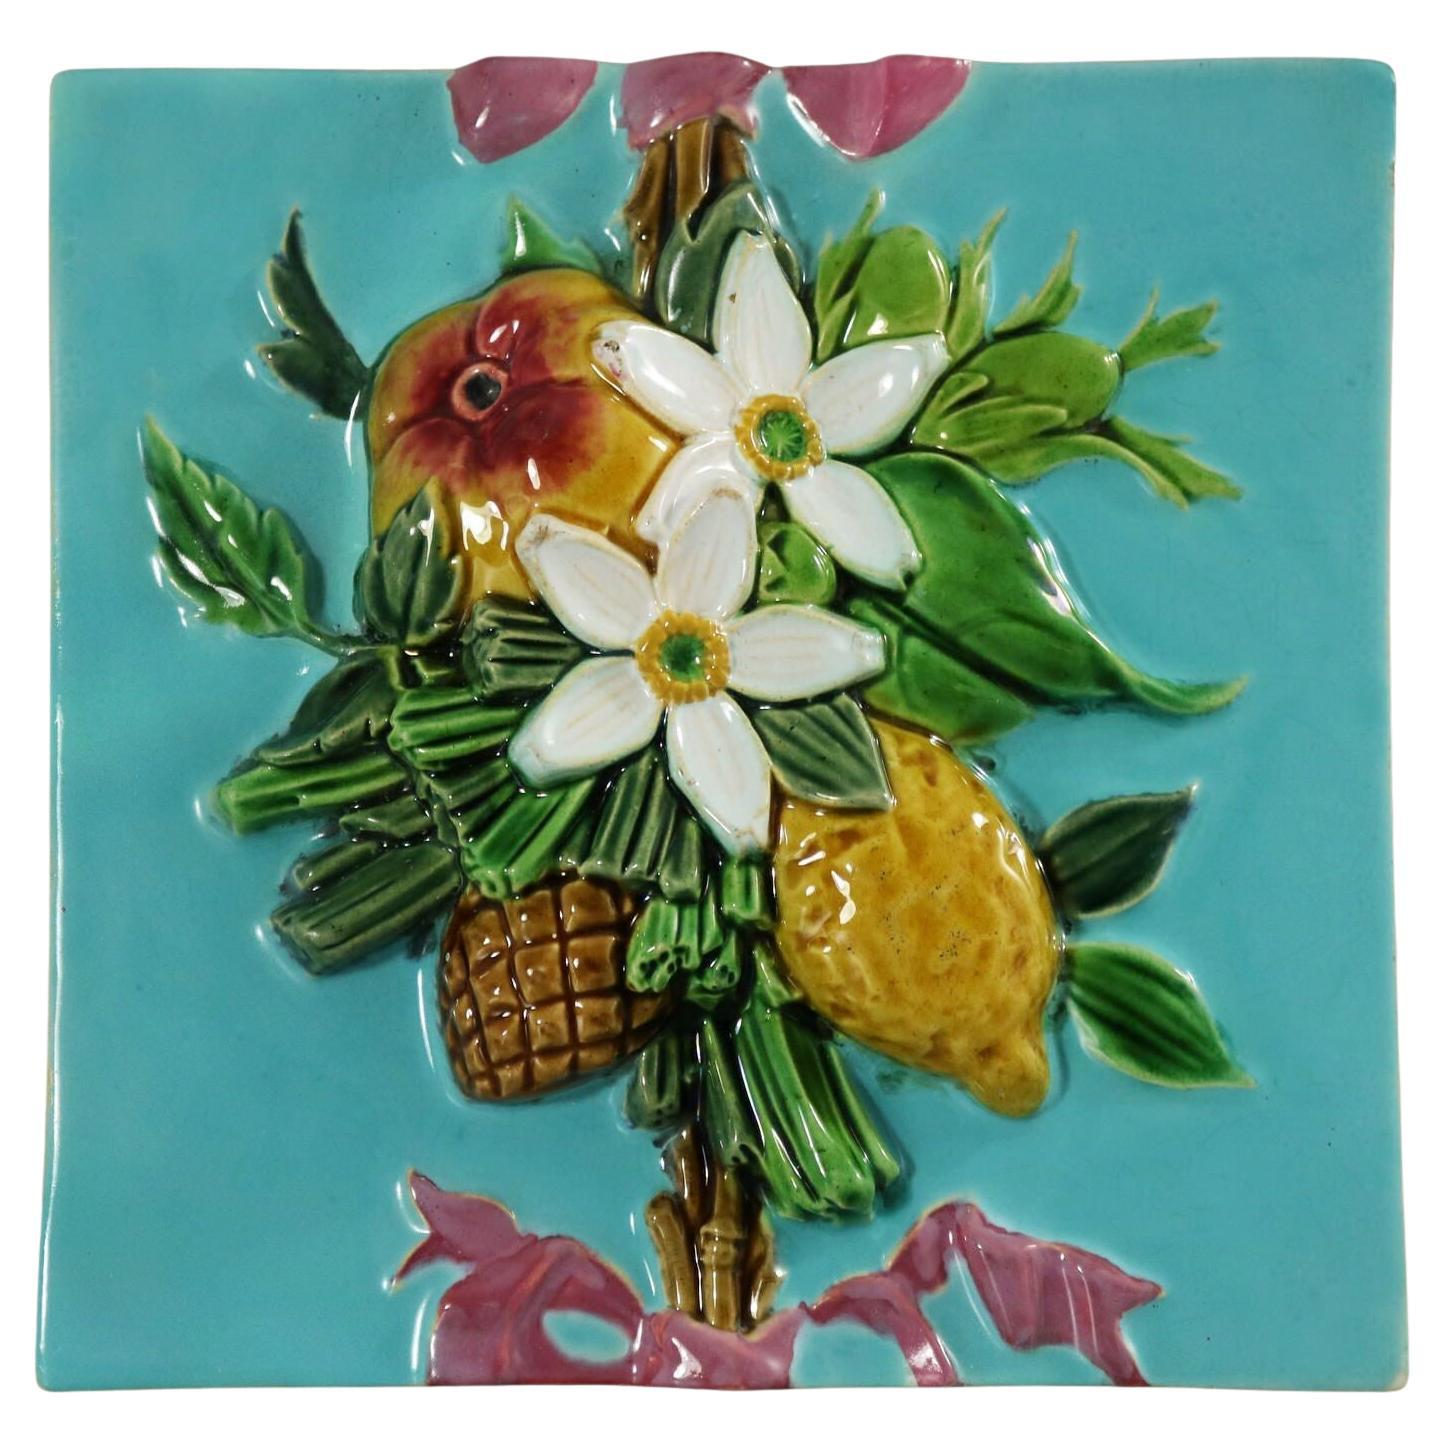 Minton Majolica Fruit and Flowers Tile For Sale